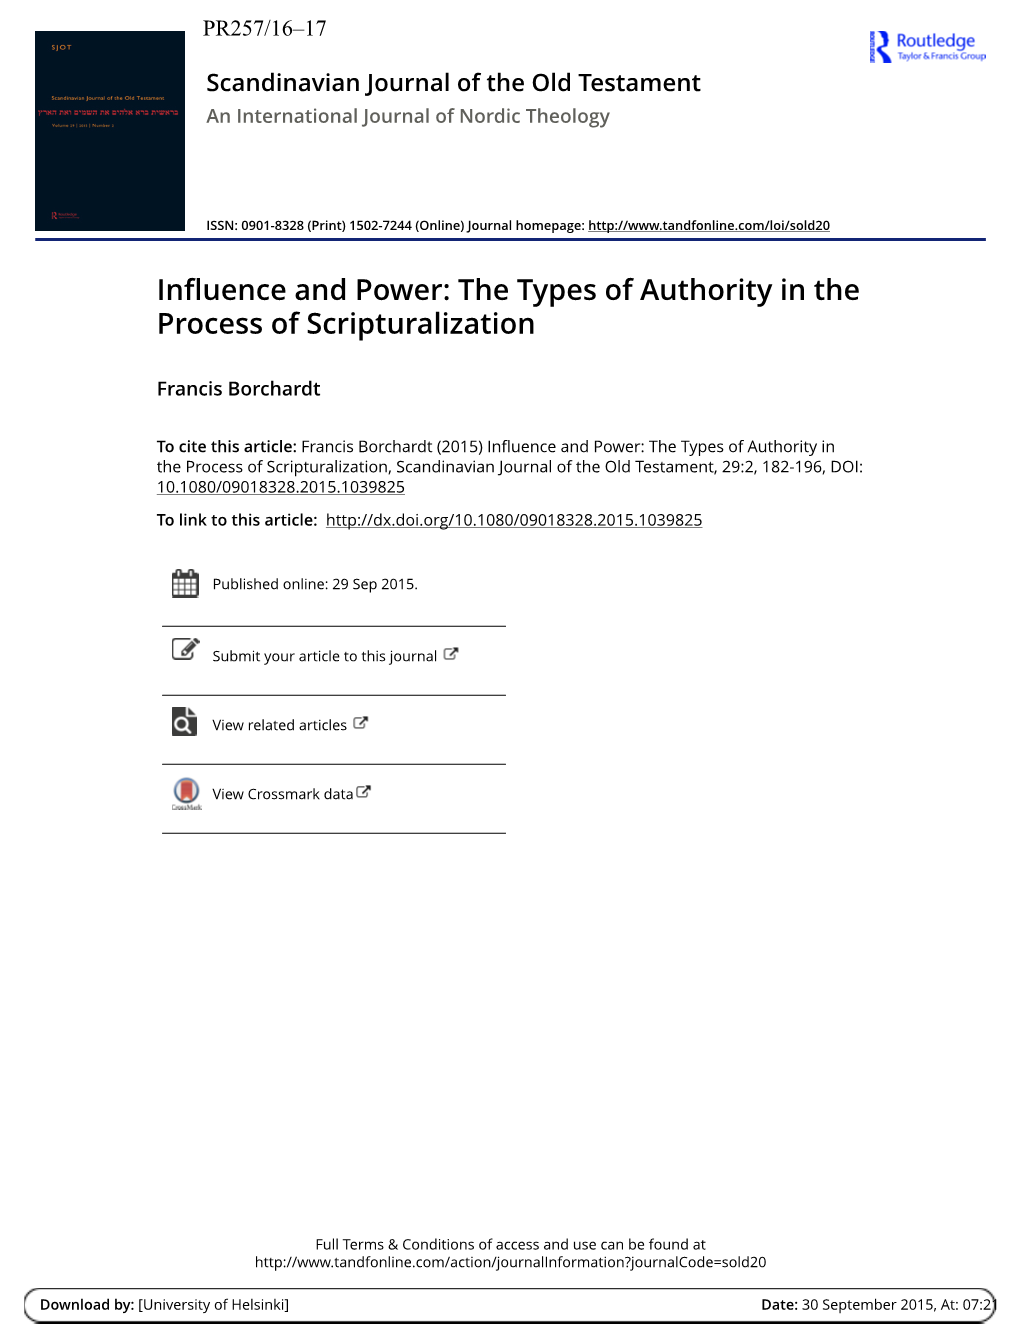 Influence and Power: the Types of Authority in the Process of Scripturalization